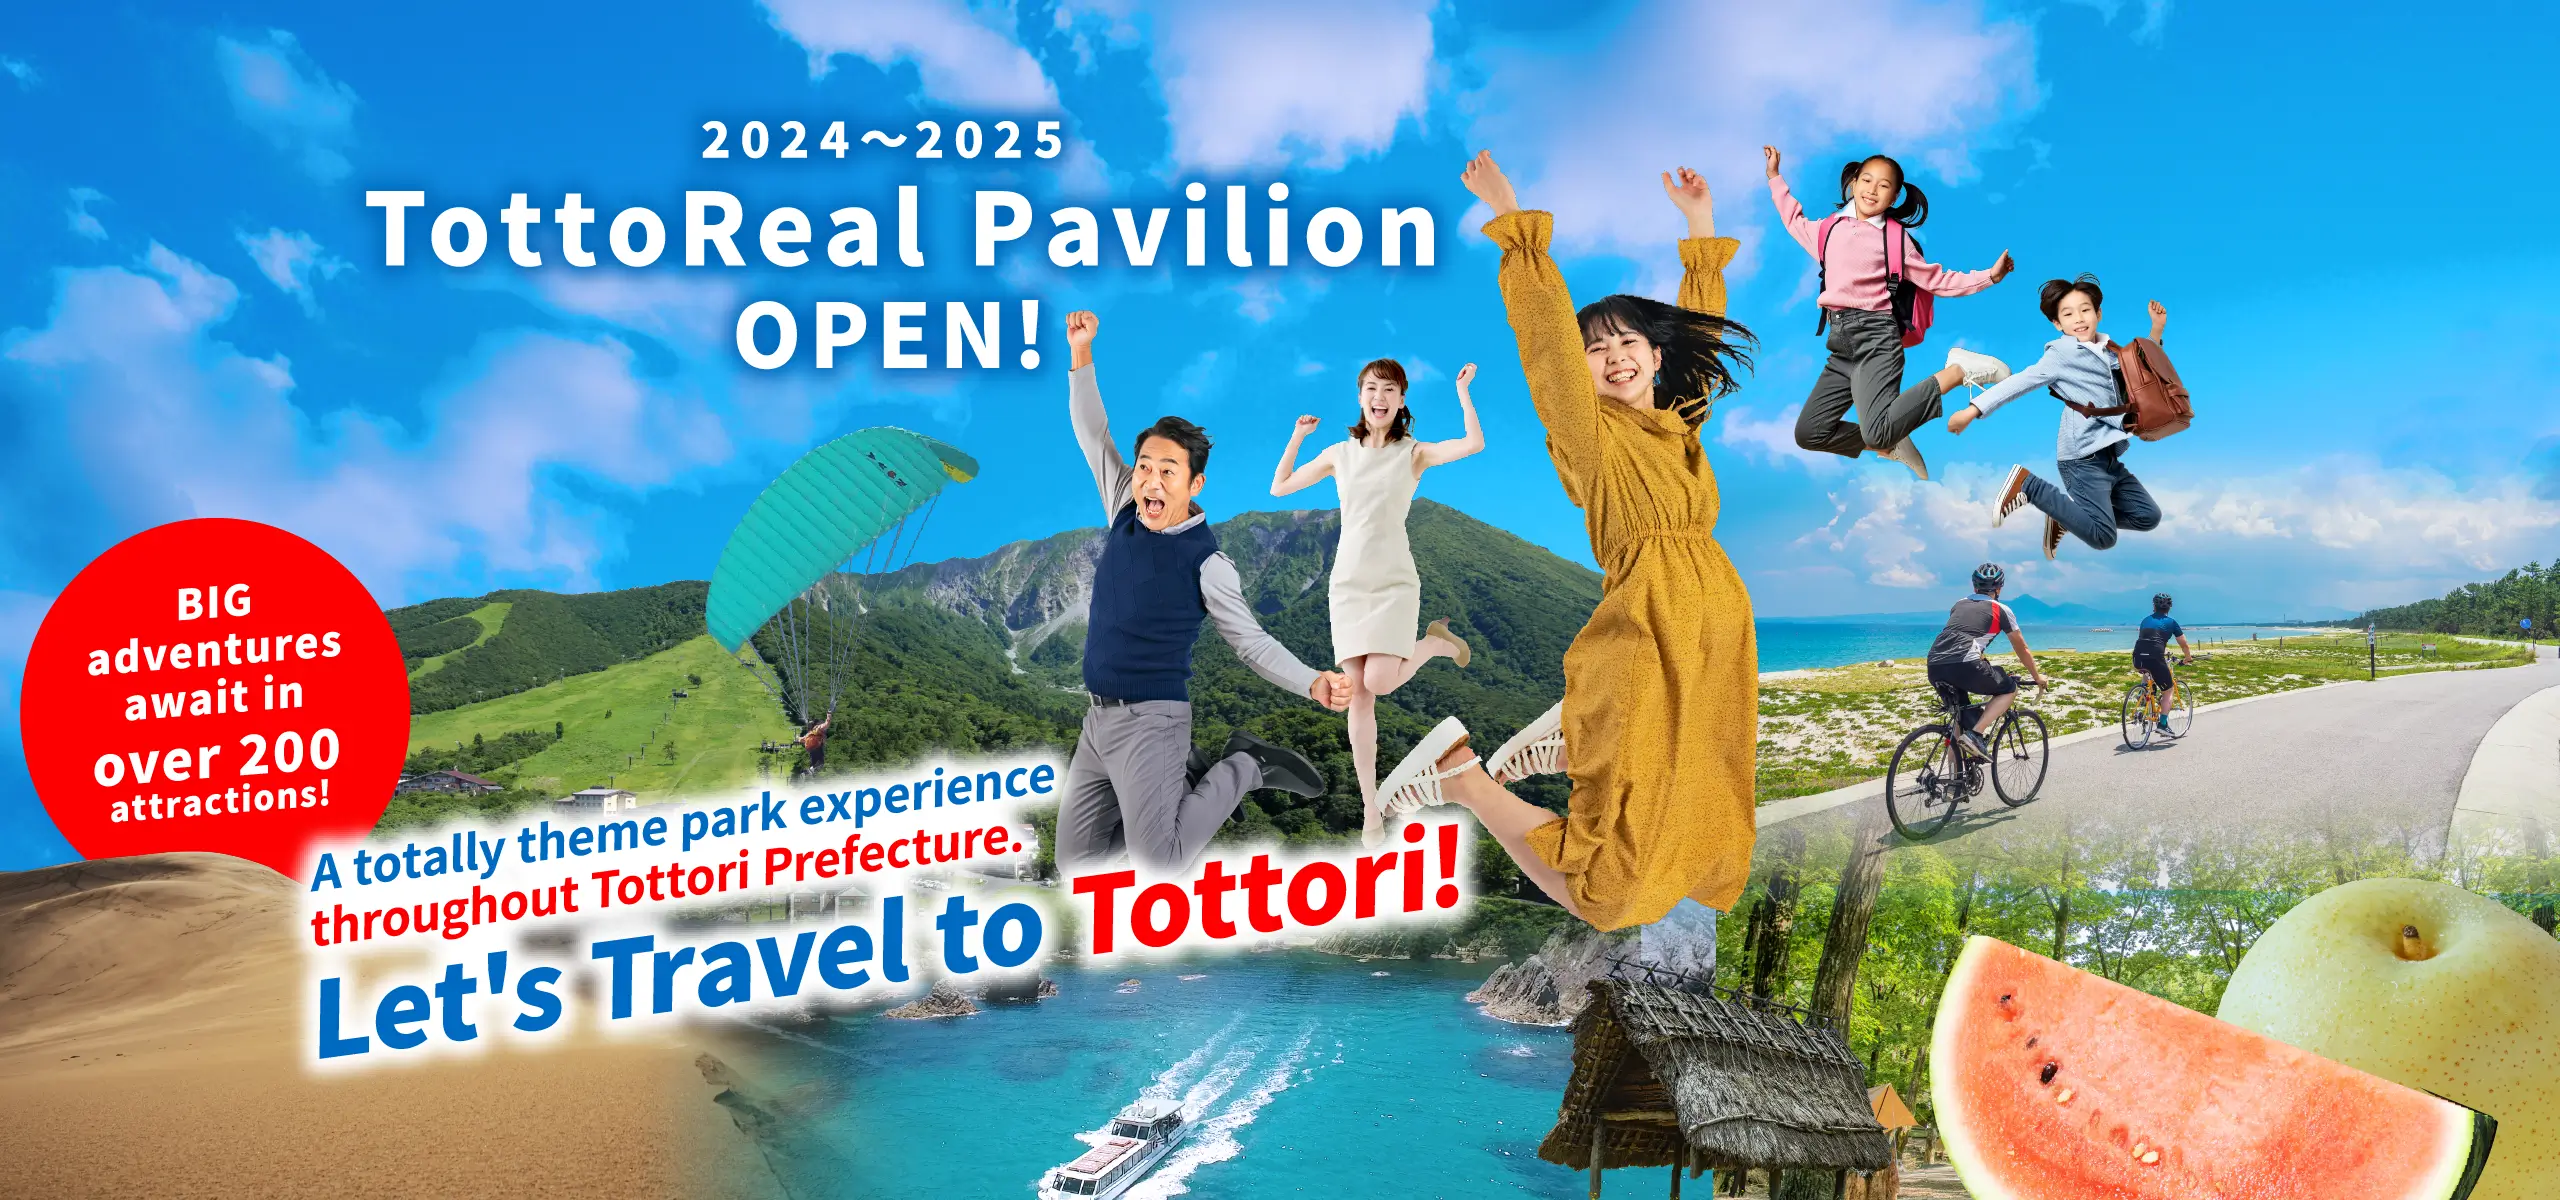 2024〜2025 TottoReal Pavilion OPEN ! A totally theme park experience throughout Tottori Prefecture. Let's travel to Tottori !